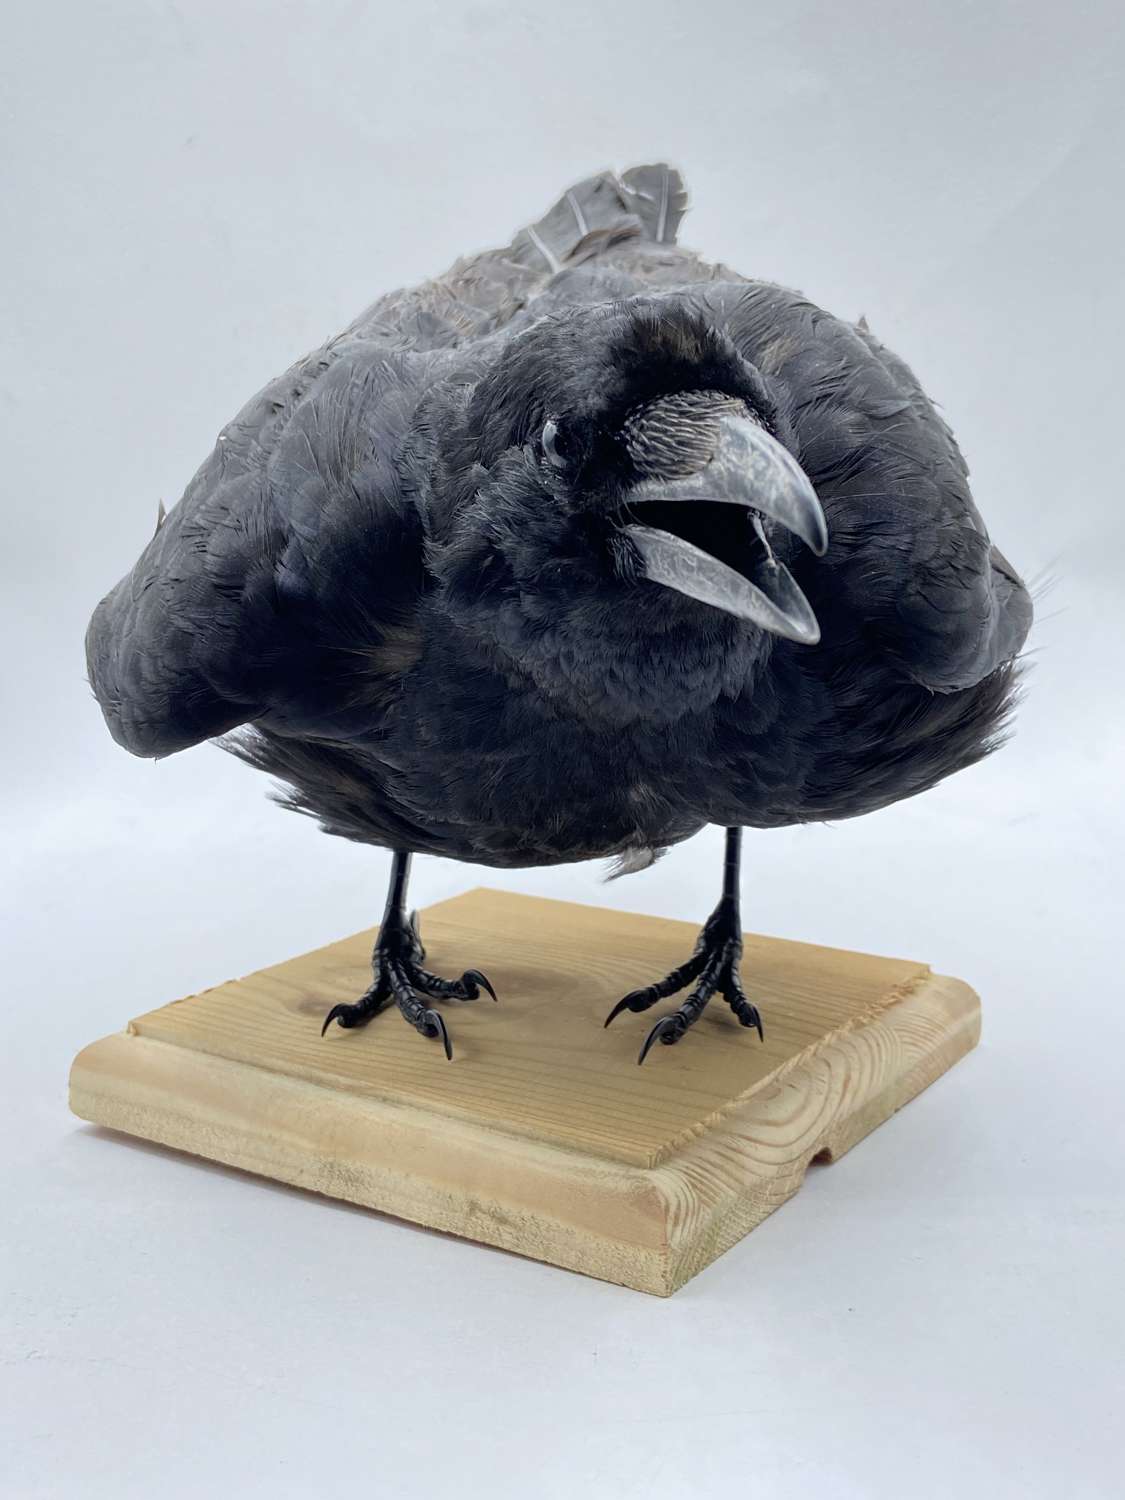 Gothic Squawking Mounted Taxidermy Carrion Crow (Corvus Corone) (7)